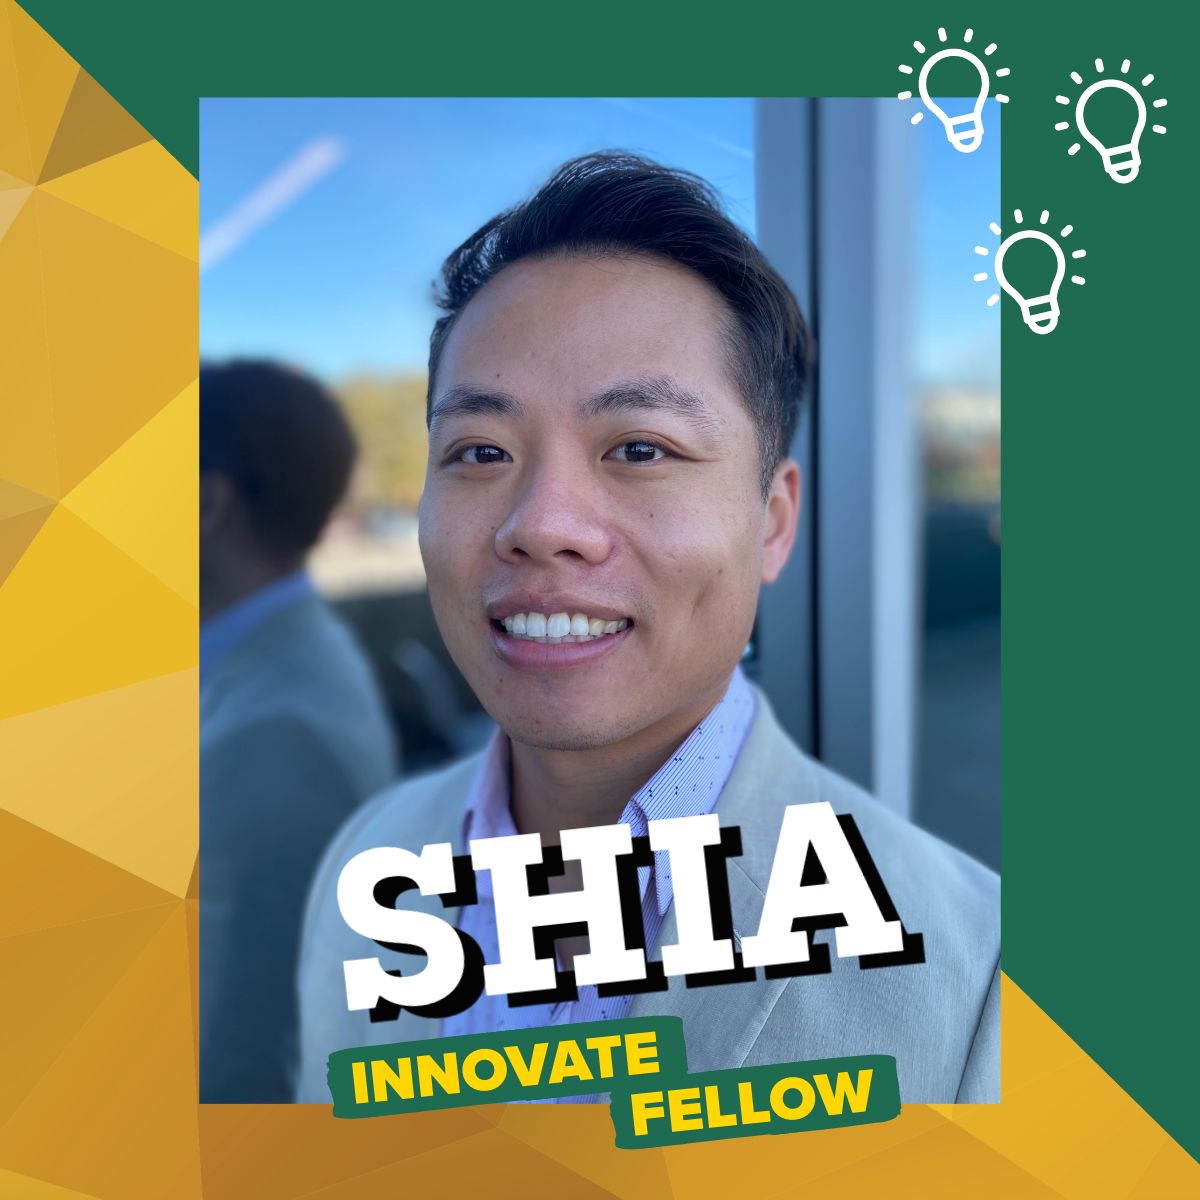 Innovate Fellow Shia Vang is enrolled in the Graduate Biomedical Sciences Ph.D. program at @UABHeersink. He's interested in a career in patent law -- and our office is the perfect place to start learning. Learn about being an Innovate Fellow: buff.ly/3EcTnEj.